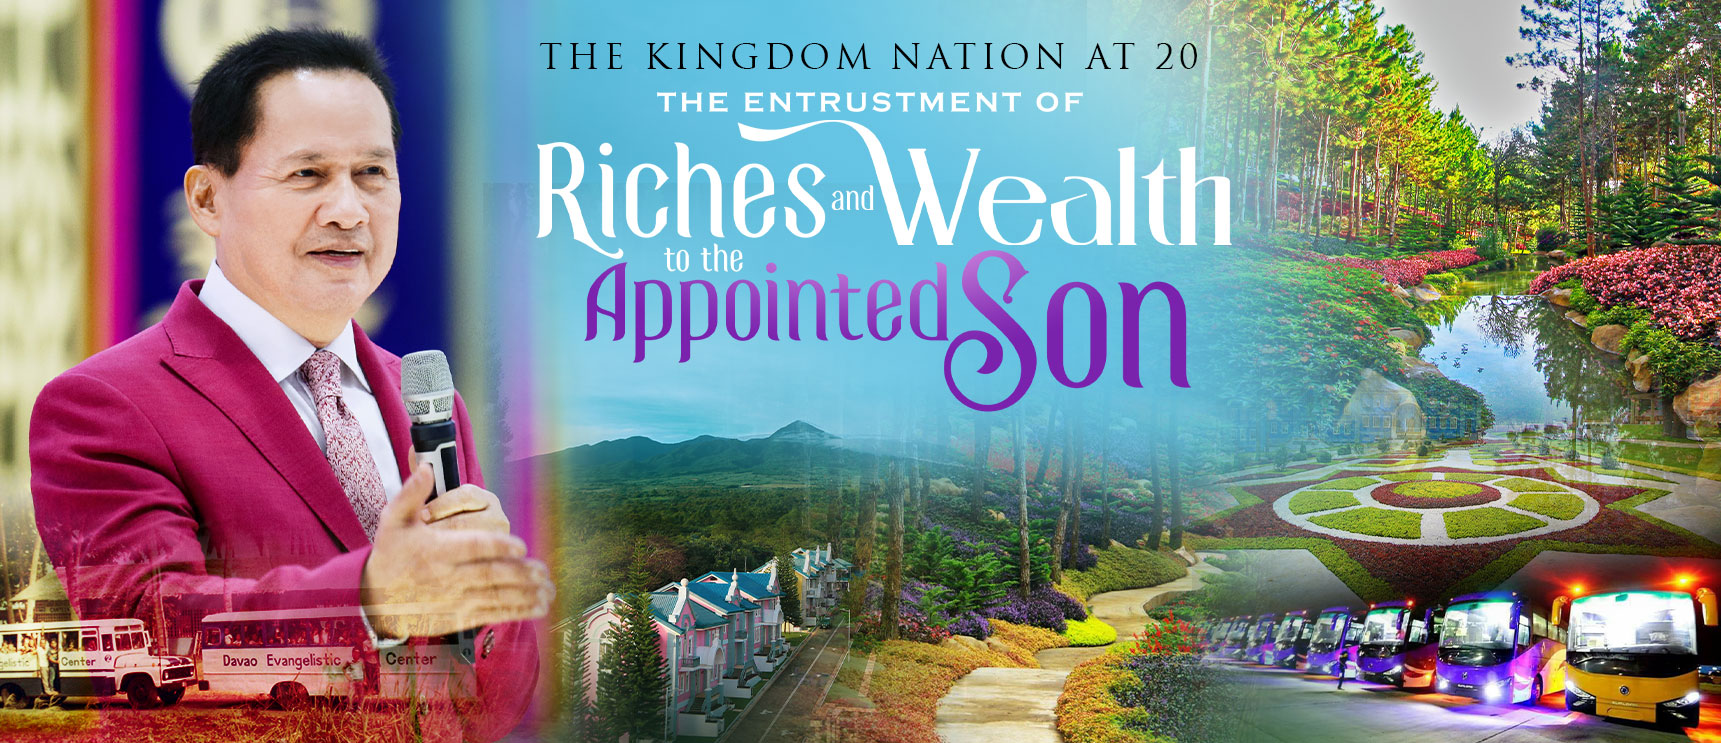 Riches and Wealth wide 1